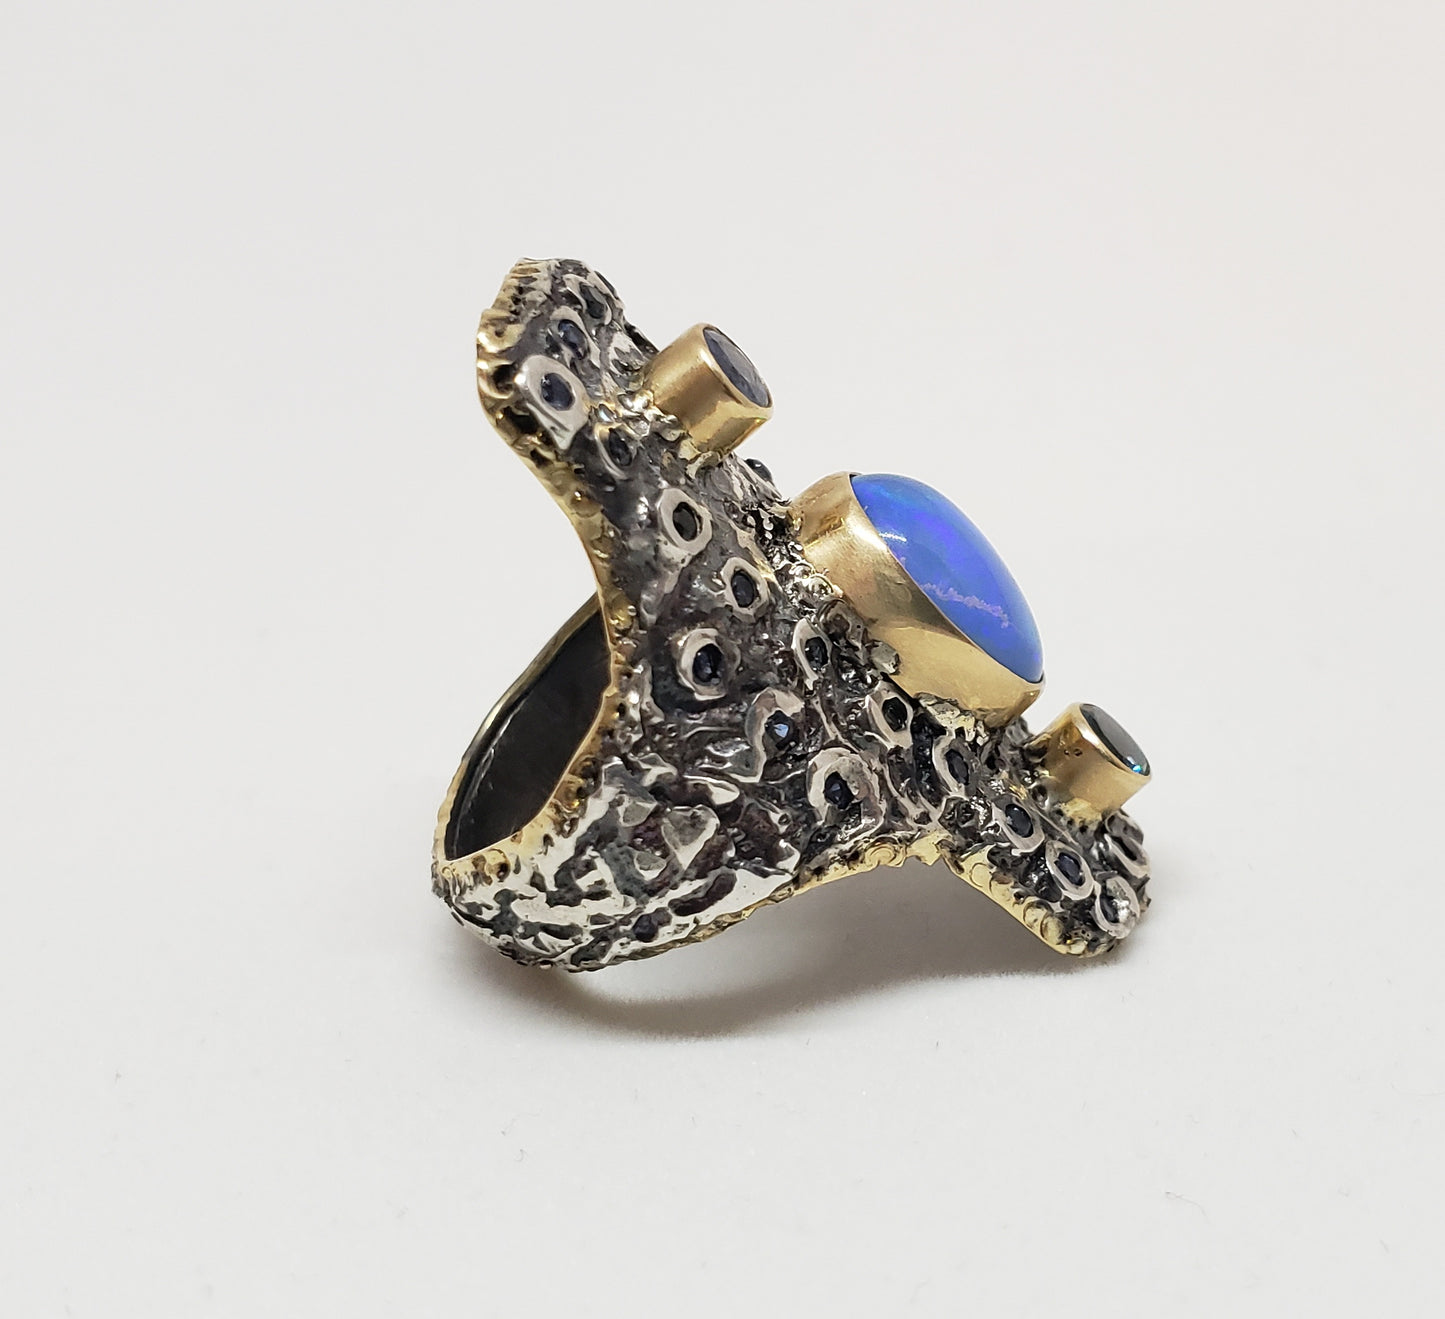 Opal & Sapphire Ring Silver & Gold